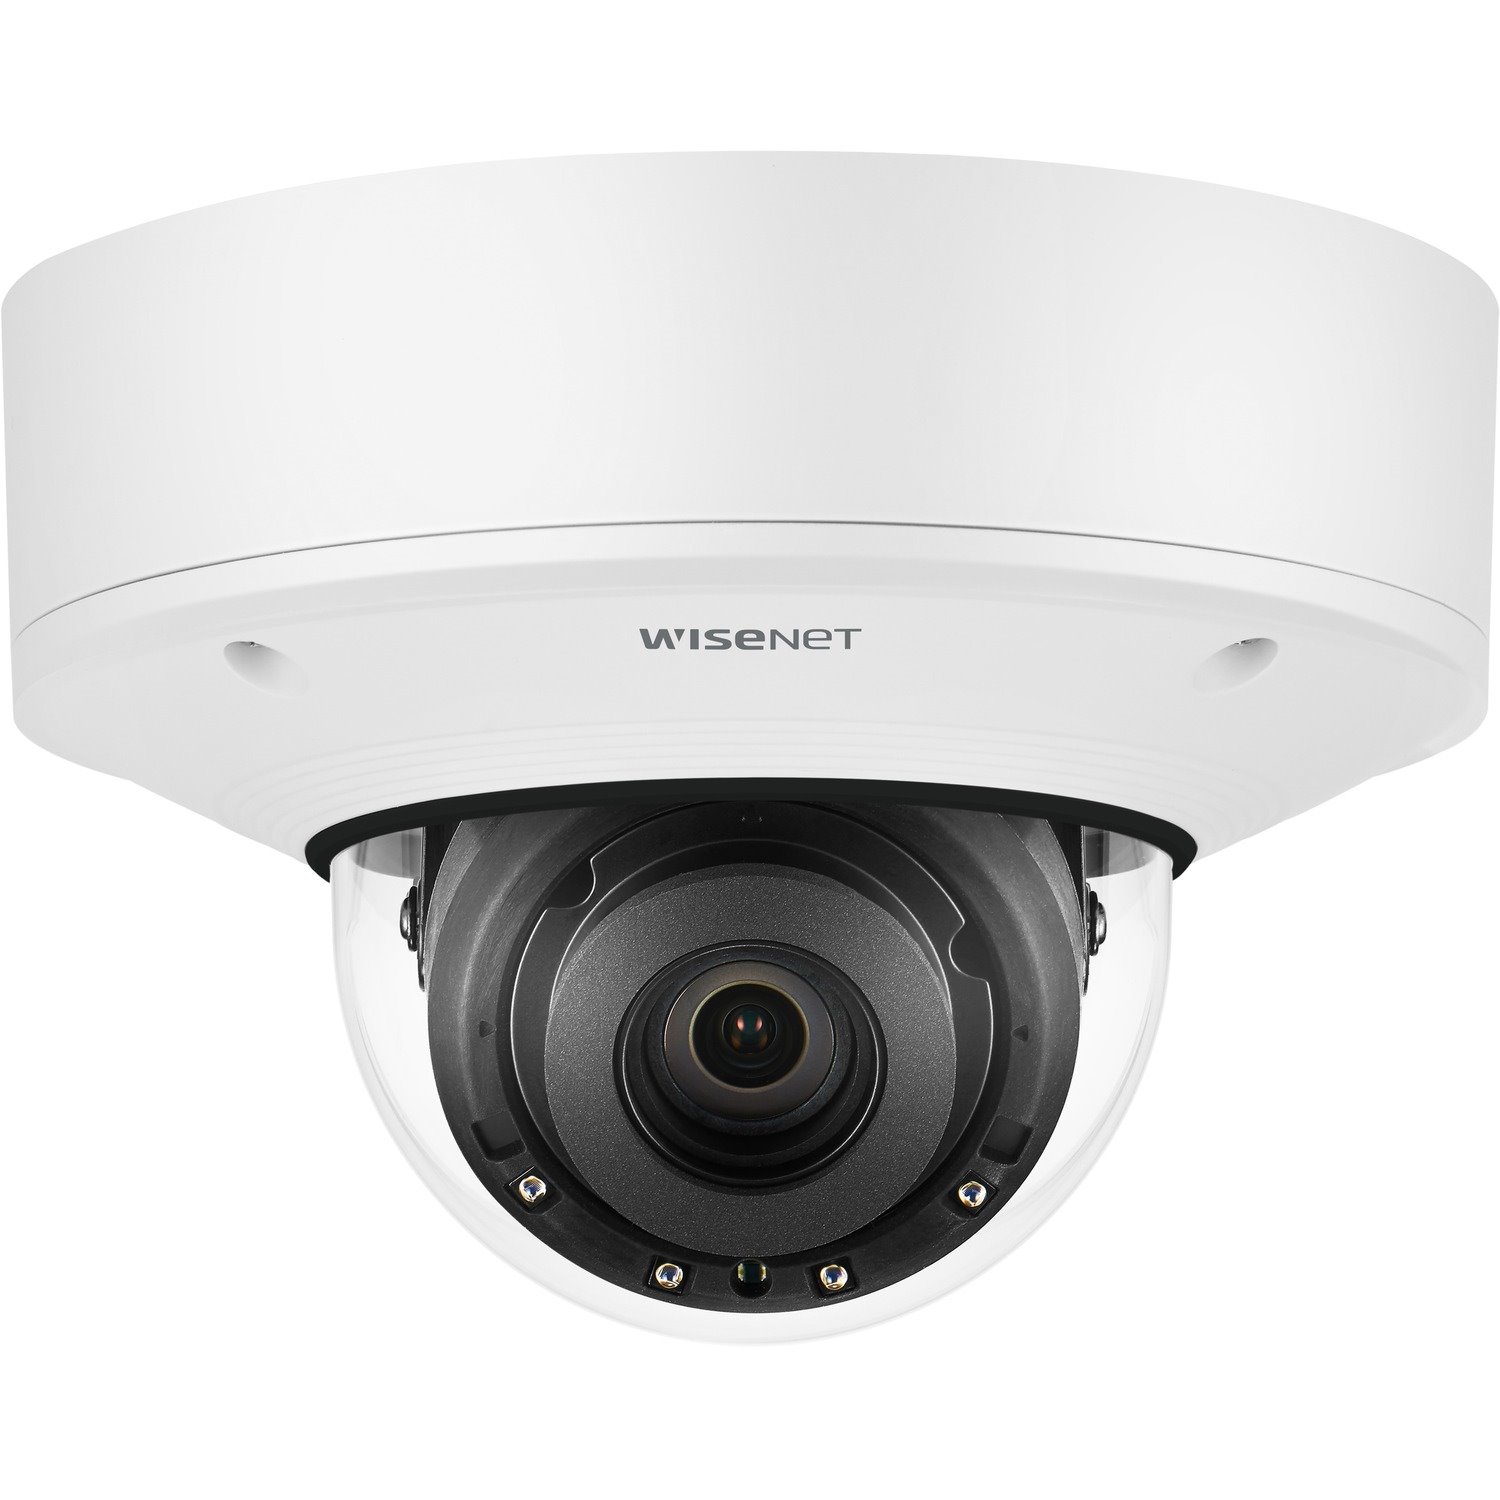 Hanwha Techwin PNV-A9081R 8 Megapixel Outdoor 4K Network Camera - Color - Dome - White